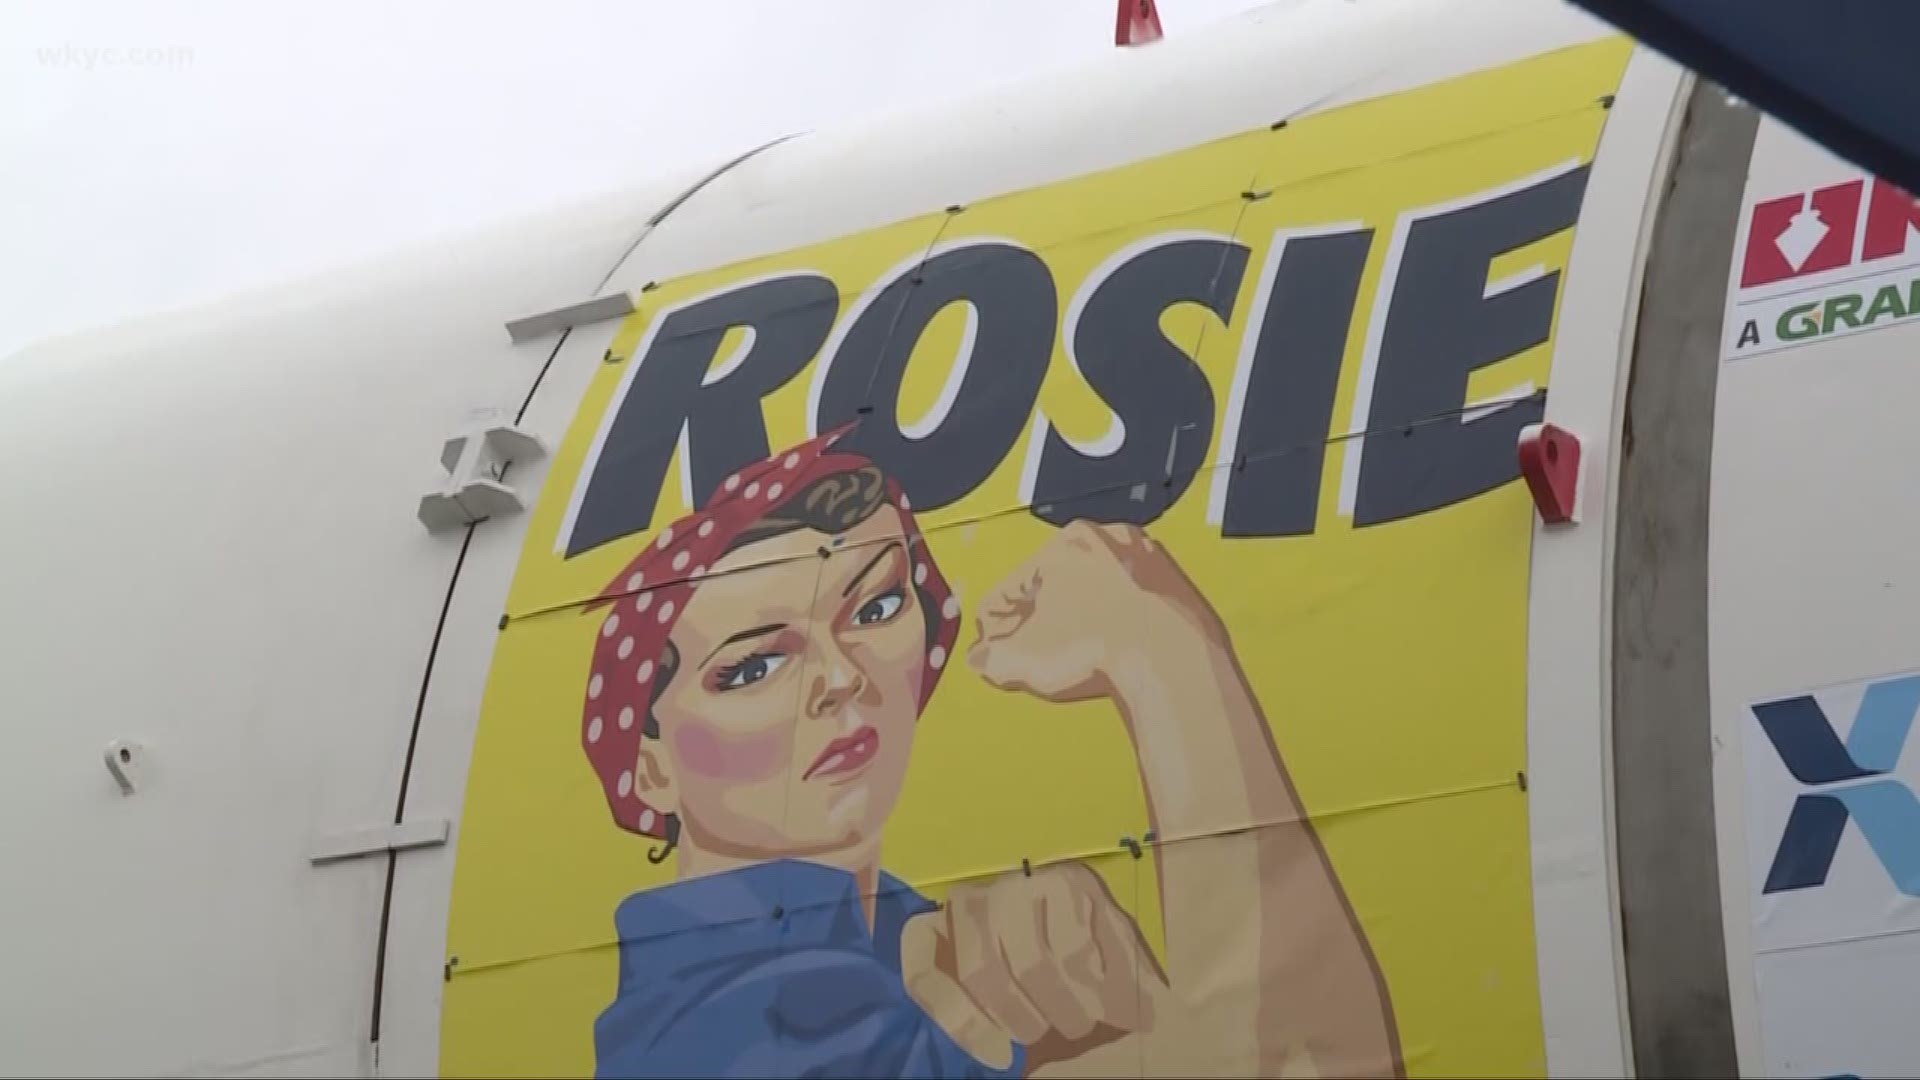 Aug. 29, 2018: 'Rosie' -- the gigantic tunnel boring machine burrowing under downtown Akron -- is expected to complete its 6,240-foot journey Wednesday.